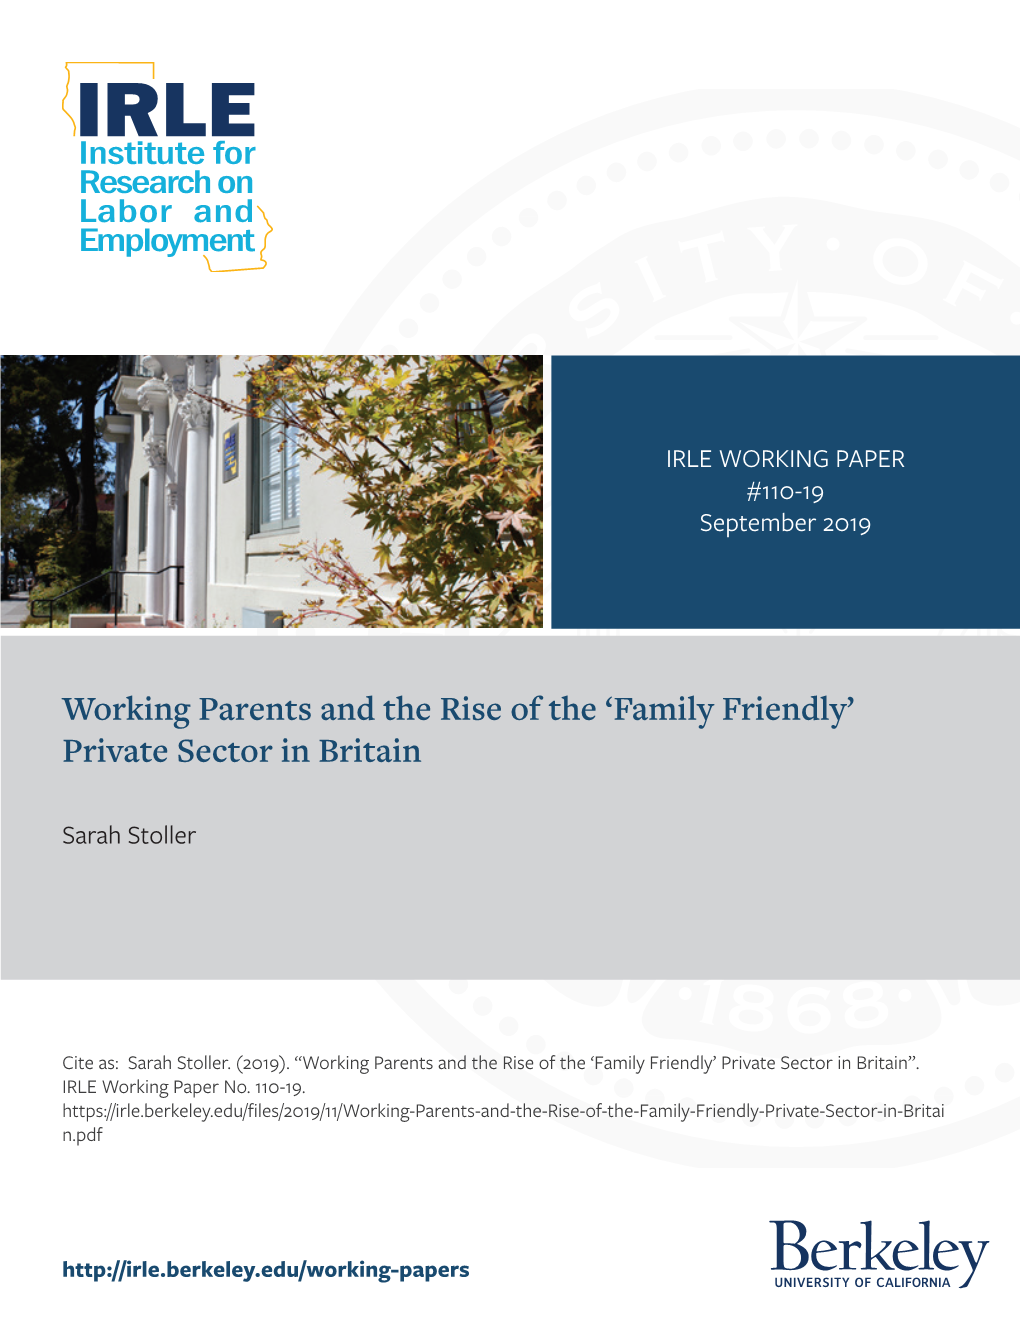 Working Parents and the Rise of the ‘Family Friendly’ Private Sector in Britain